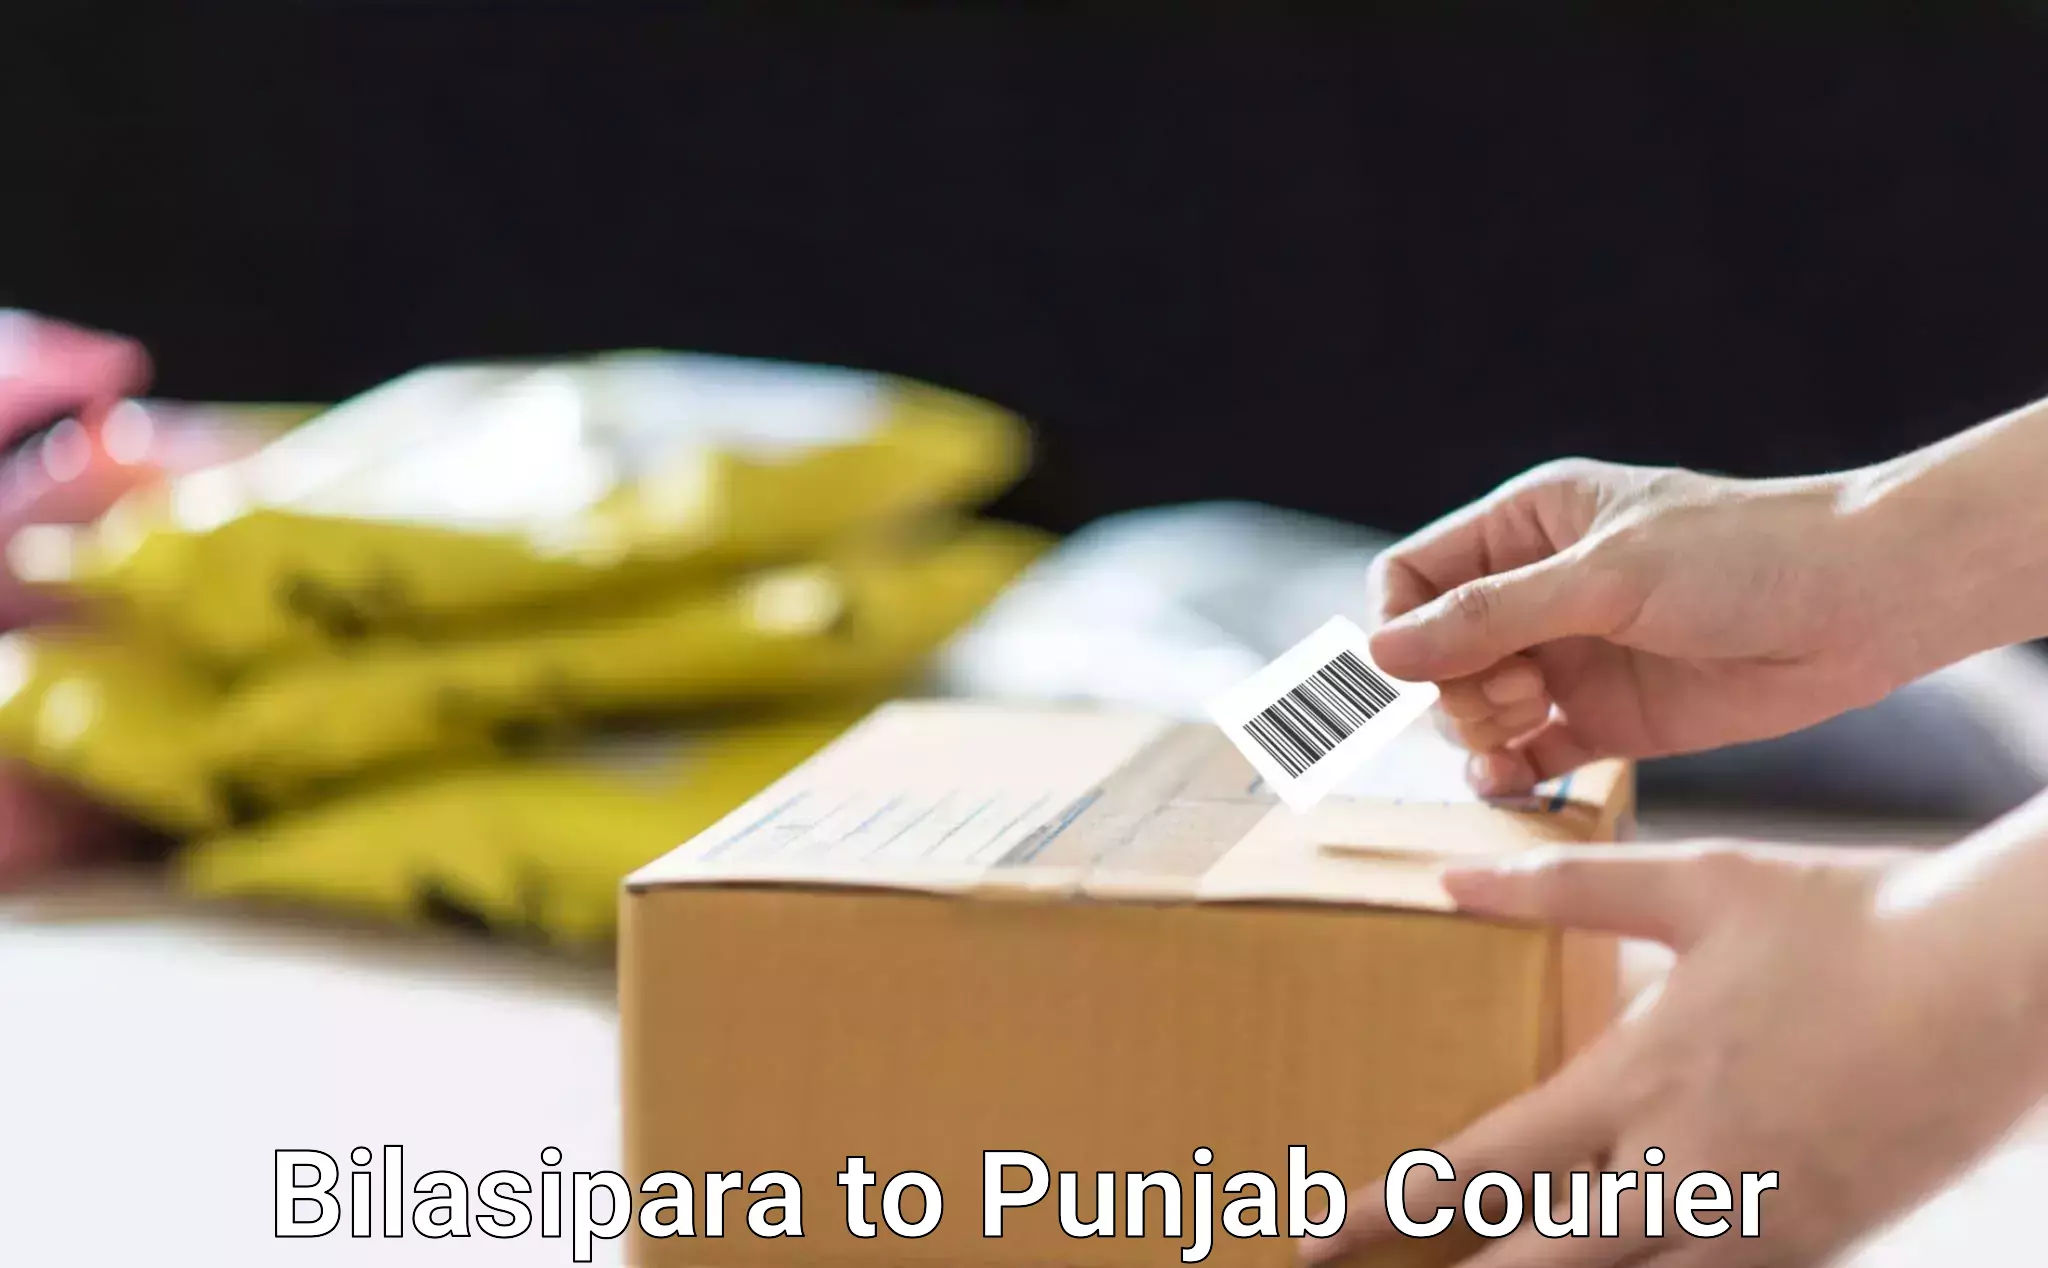 Full-service courier options Bilasipara to Punjab